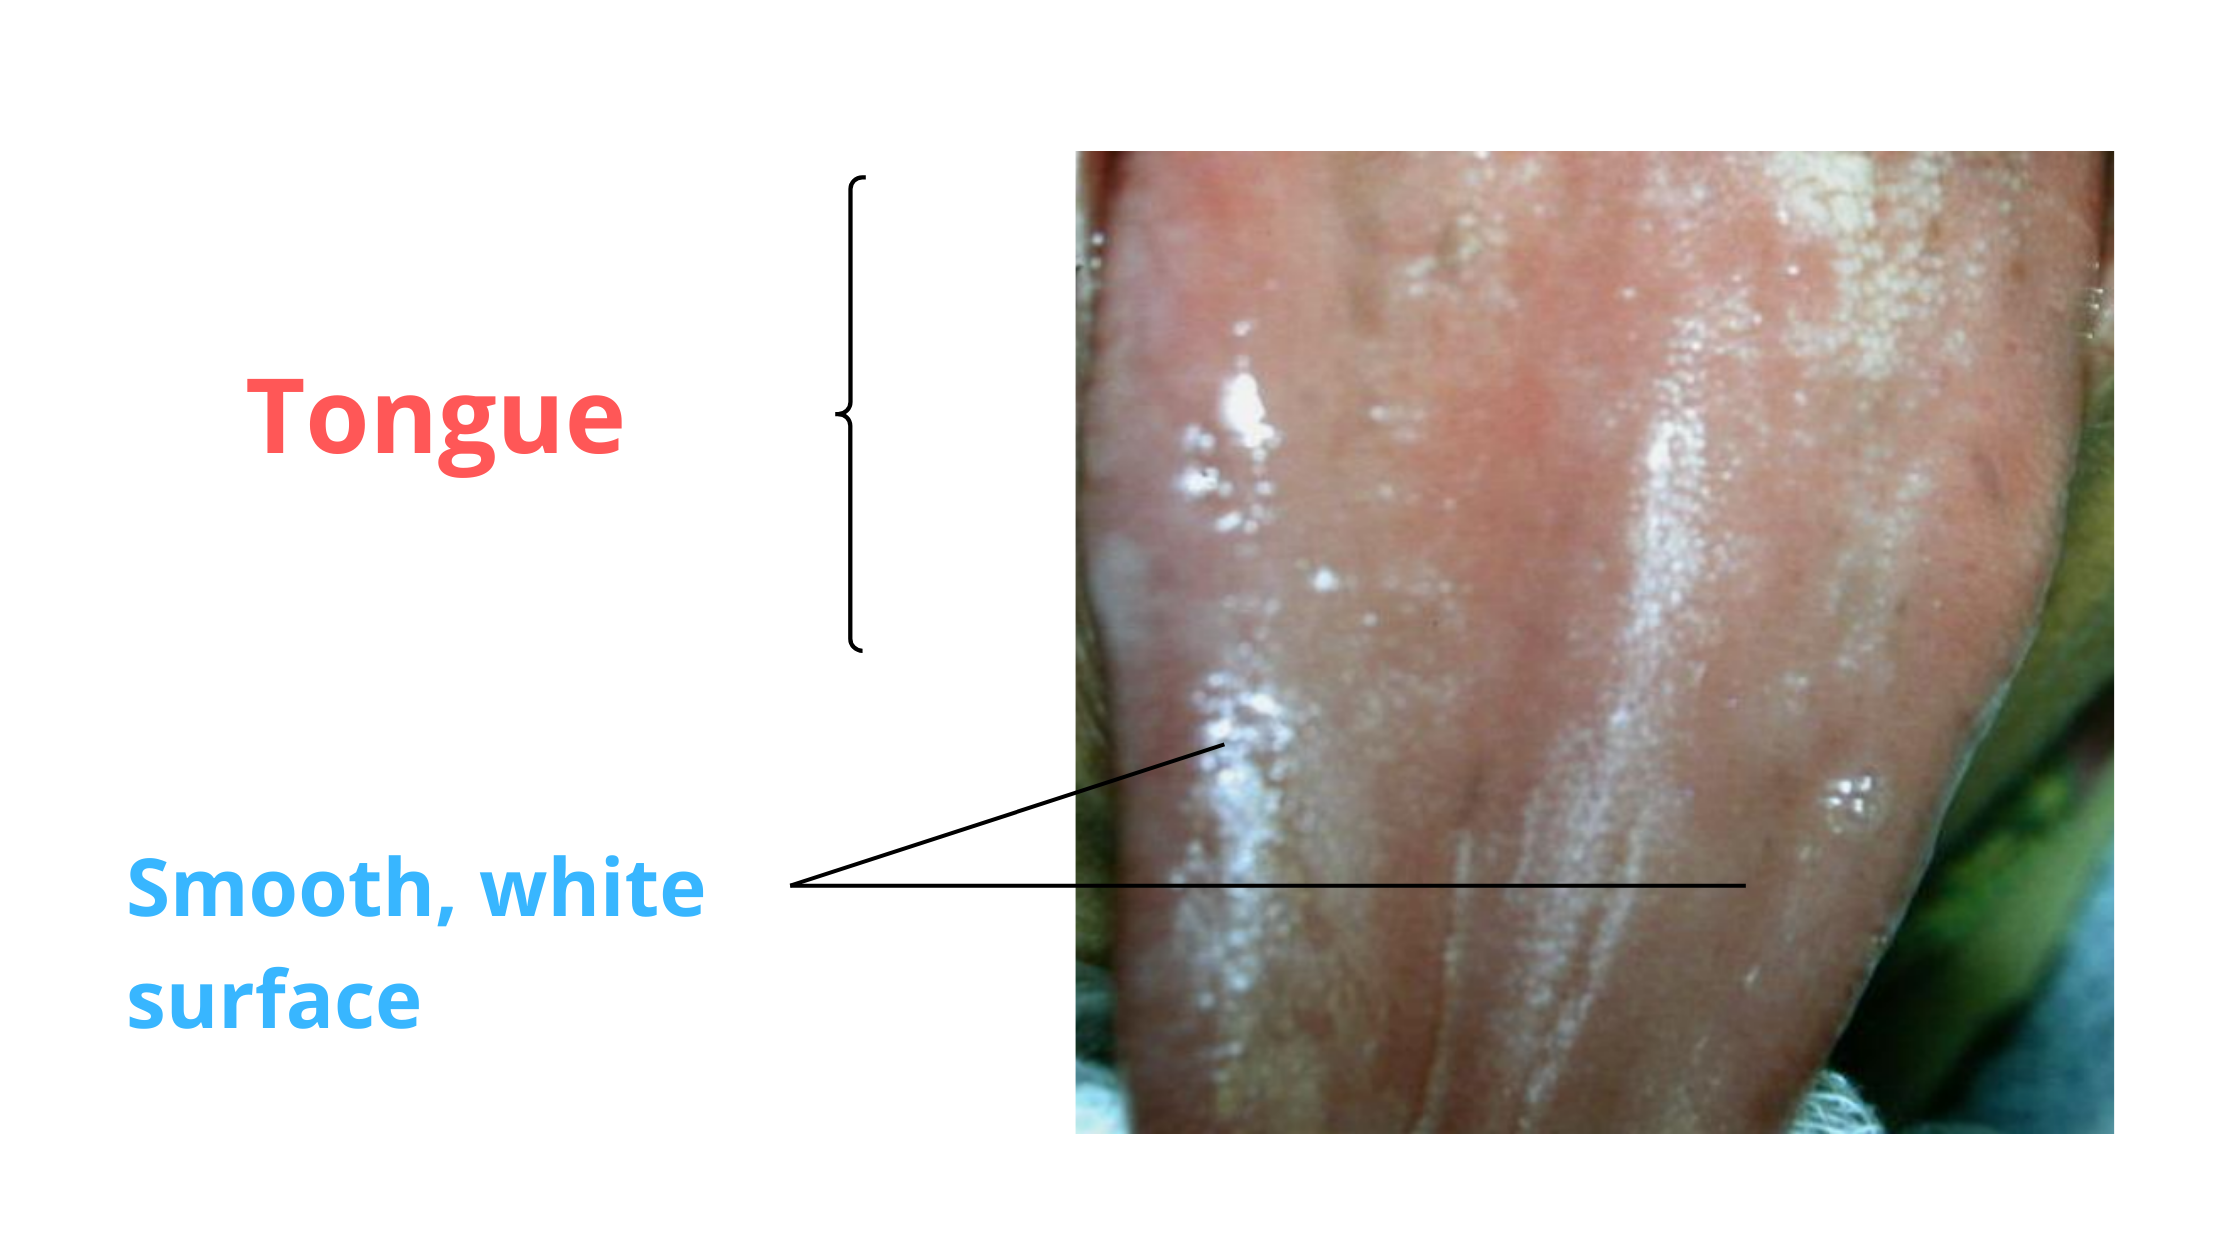 clinical image of oral lichen planus on the tongue